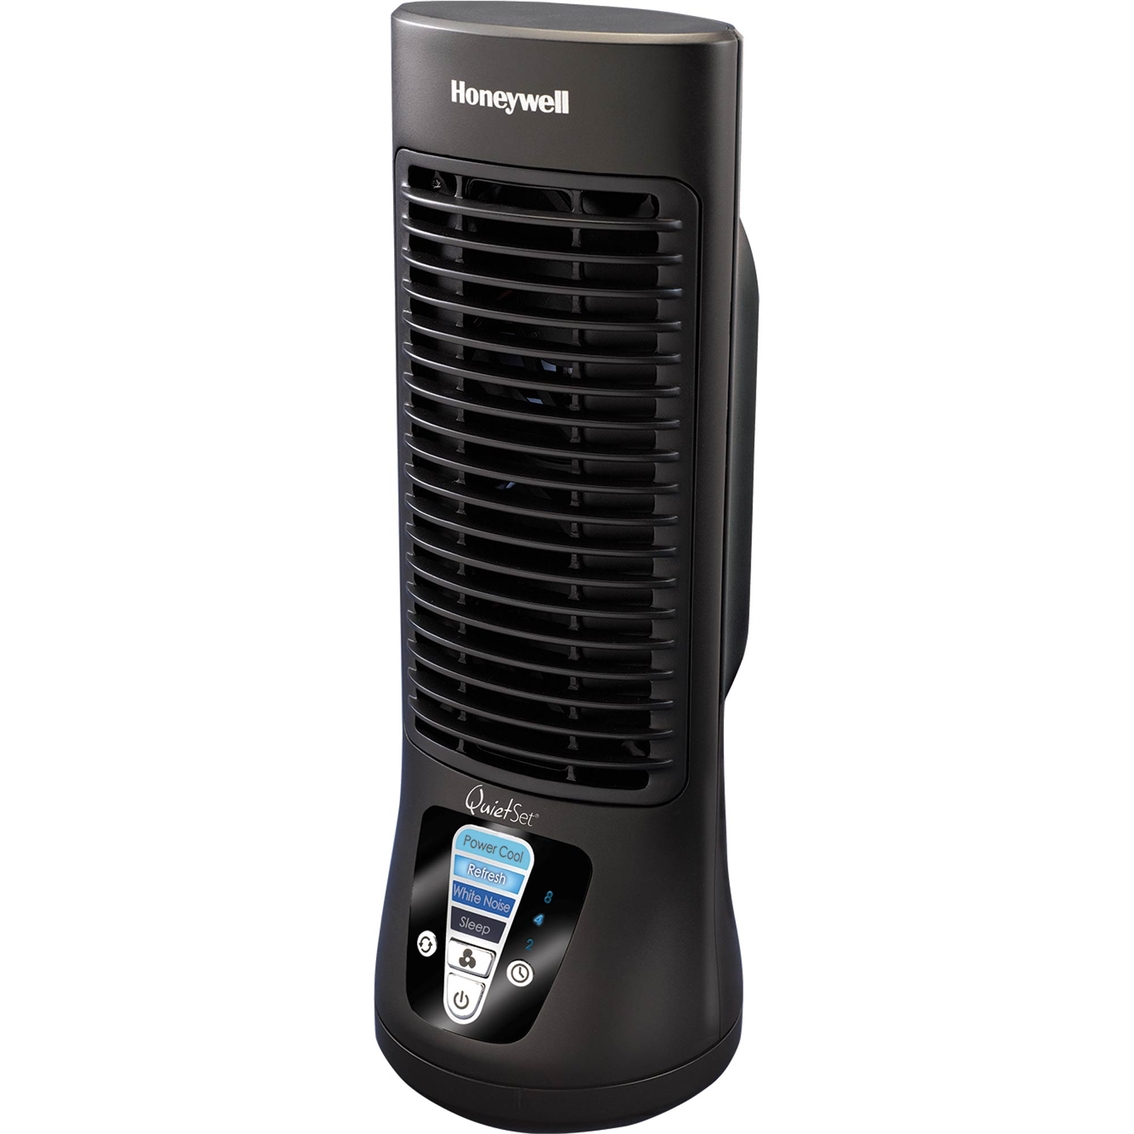 Honeywell Table Tower Personal Fan - Image 2 of 2